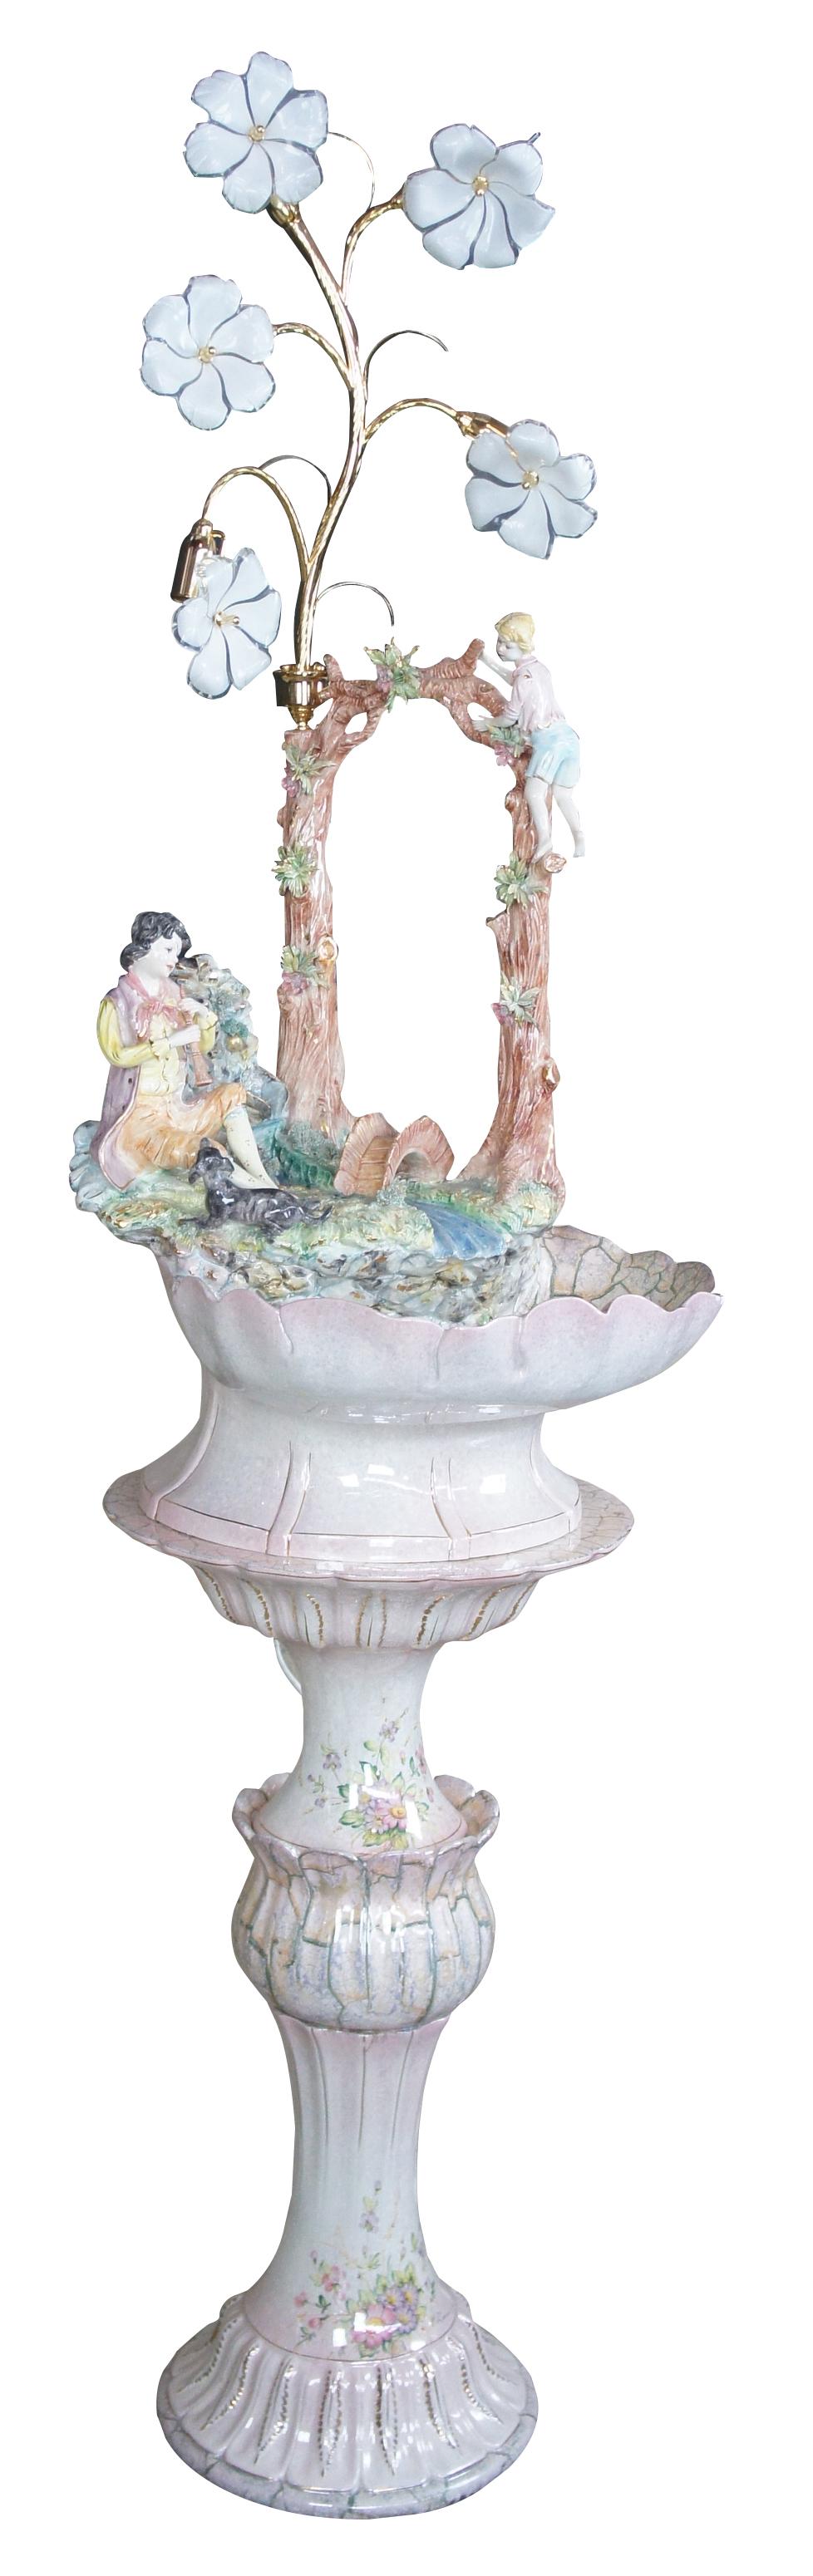 Gianni Lorenzon Italian illuminated fountain with flower petal lamp and hand painted accents. Features a colonial scene with a couple with alongside a waterfall. The gentleman can be seen playing a flute while the lady climbs the nearby tree. The